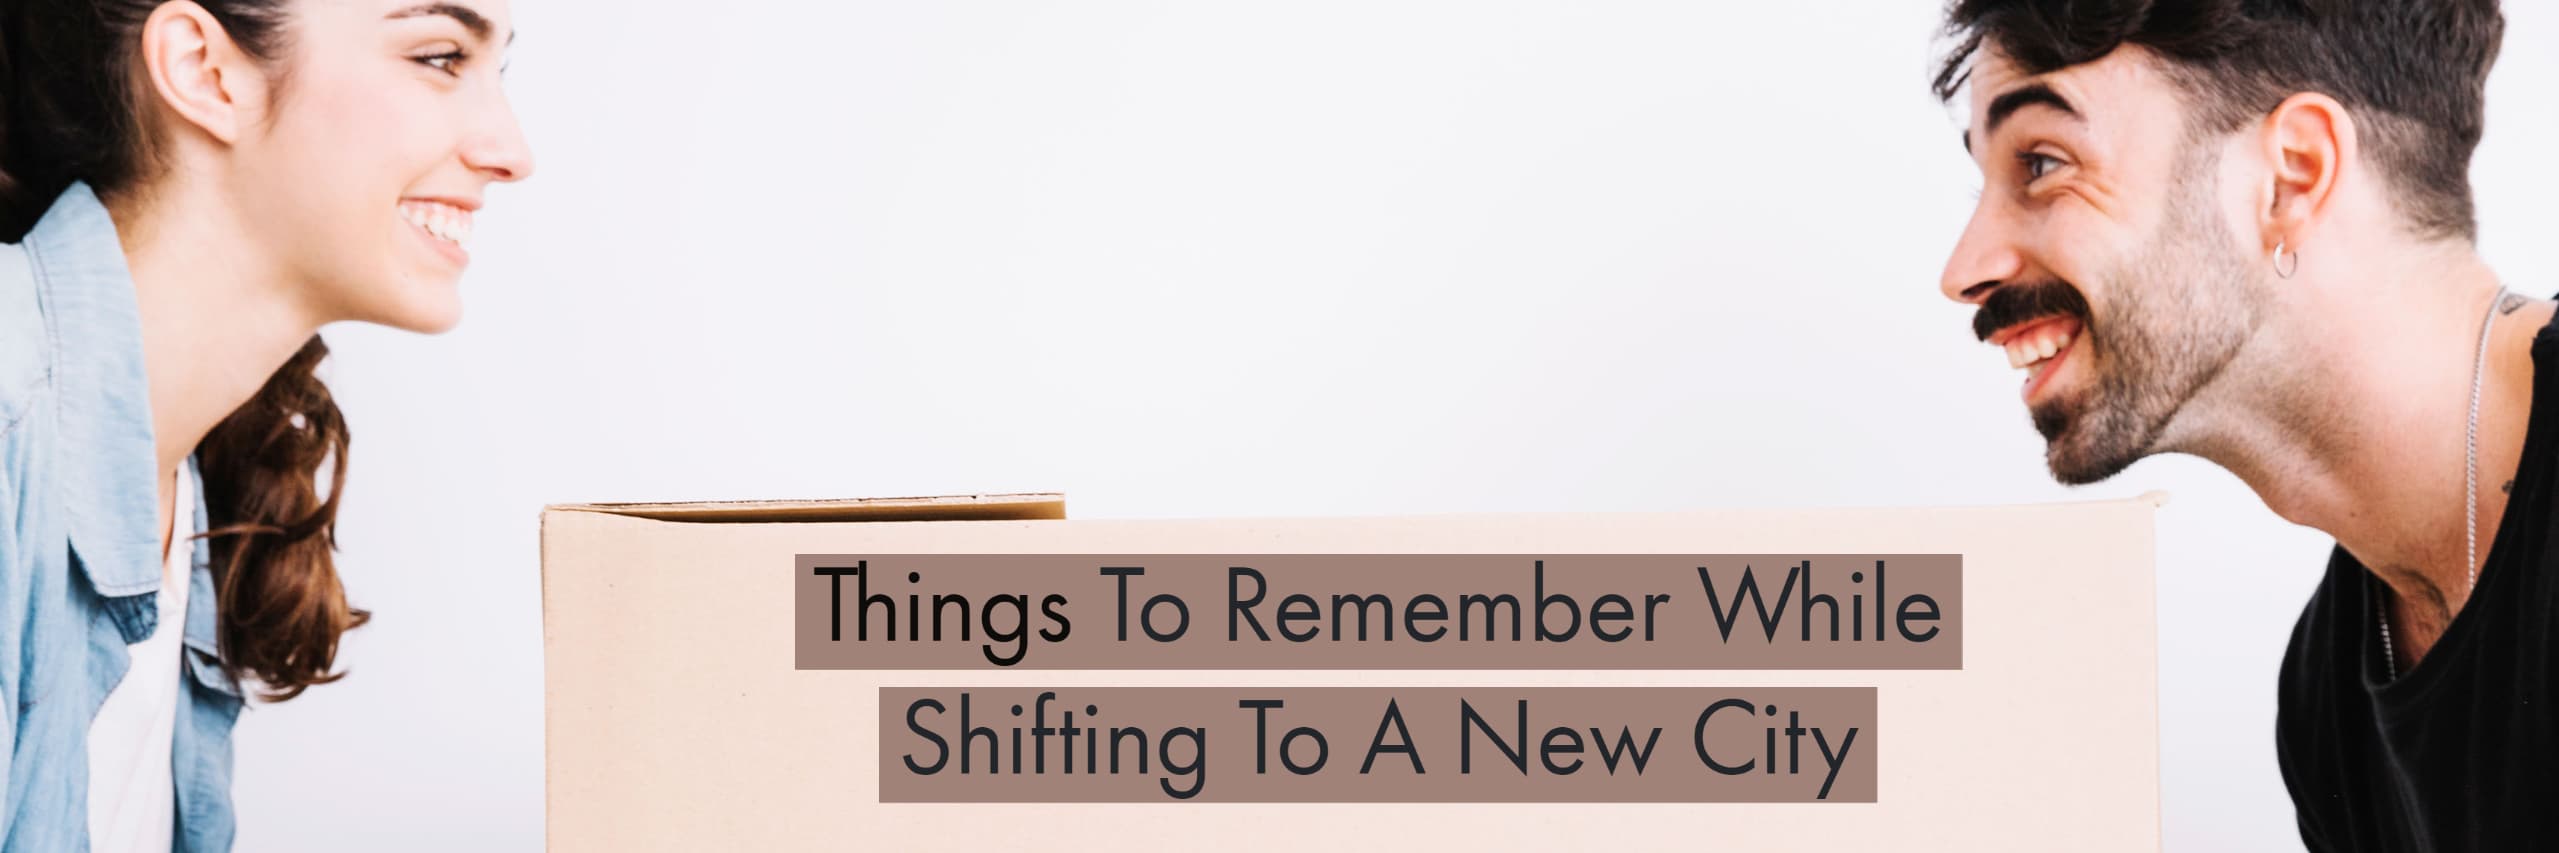 Things To Remember While Shifting To A New City